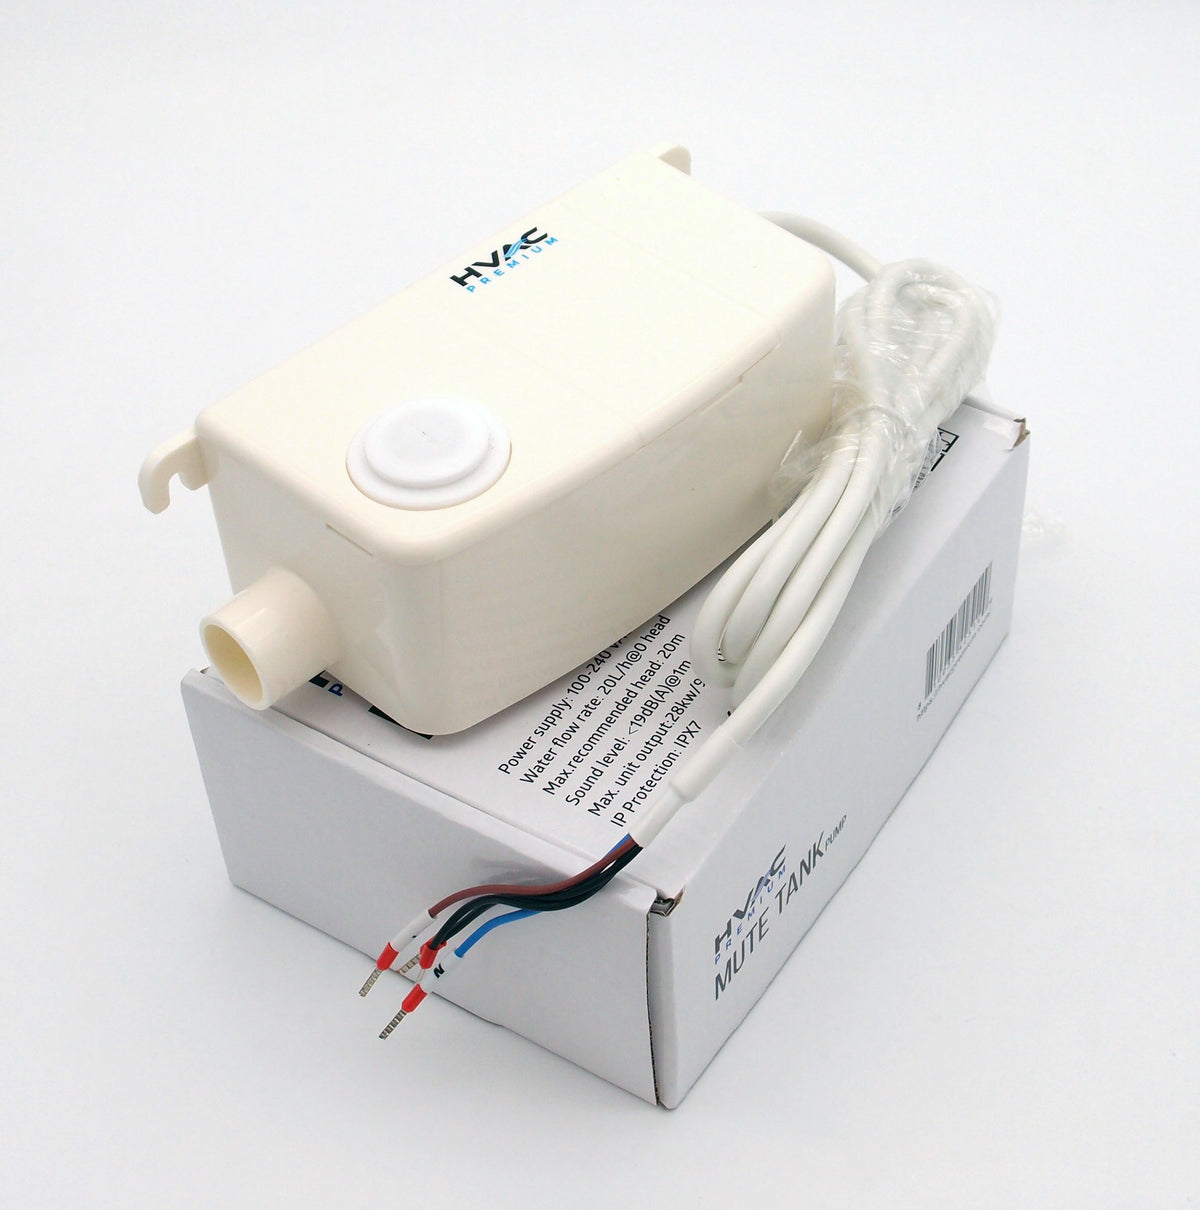 Condensate Removal Pump – Mute Tank – Automatic Safety Switch Sensor - 100-240V AC 50-60Hz